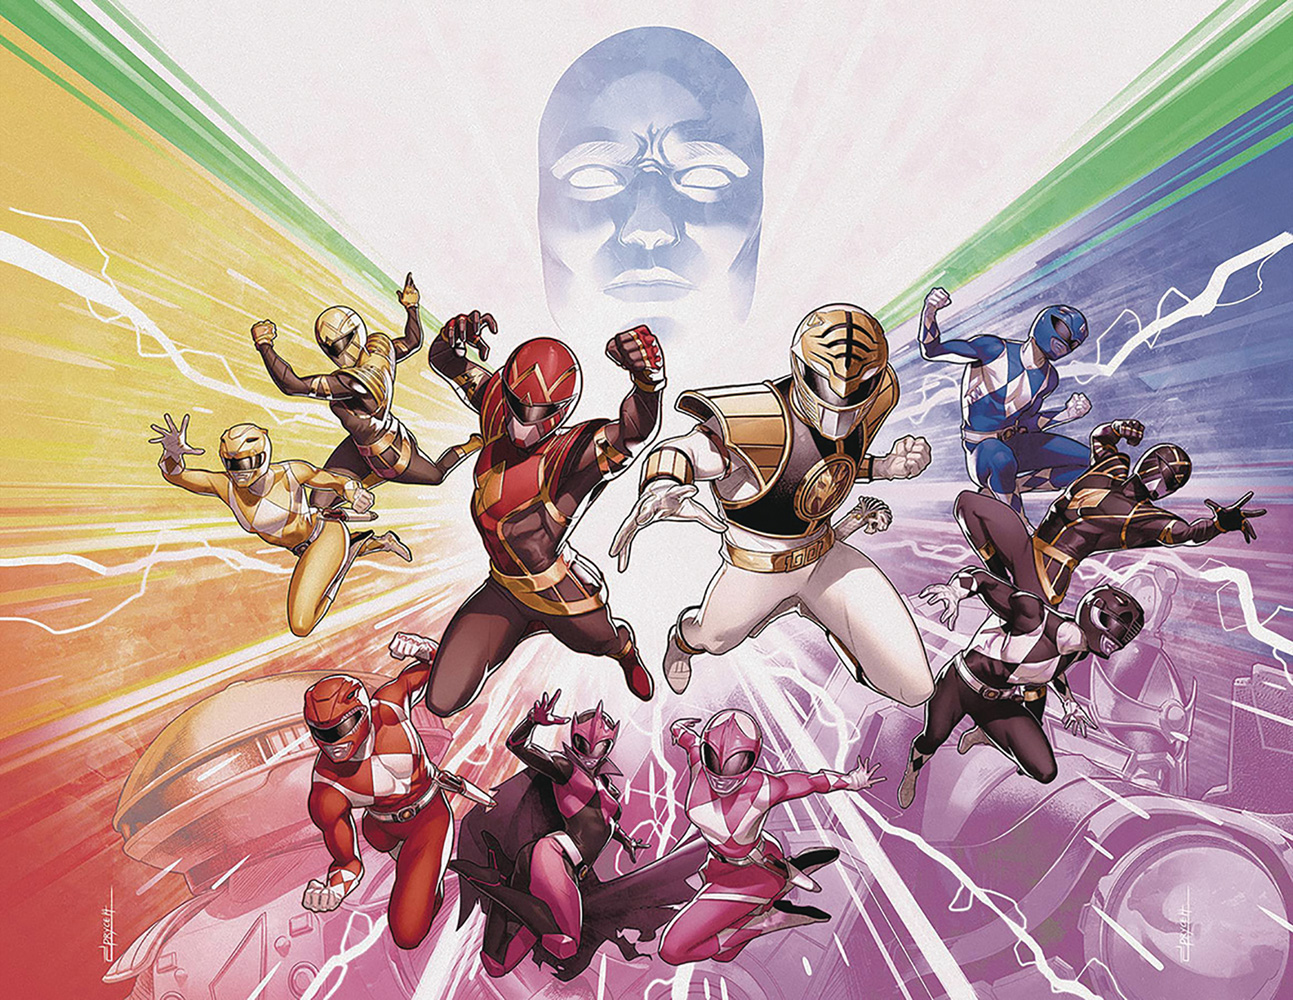 Image: Mighty Morphin Power Rangers #50 (variant Foil cover) (DFE signed - Parrott) - Dynamic Forces